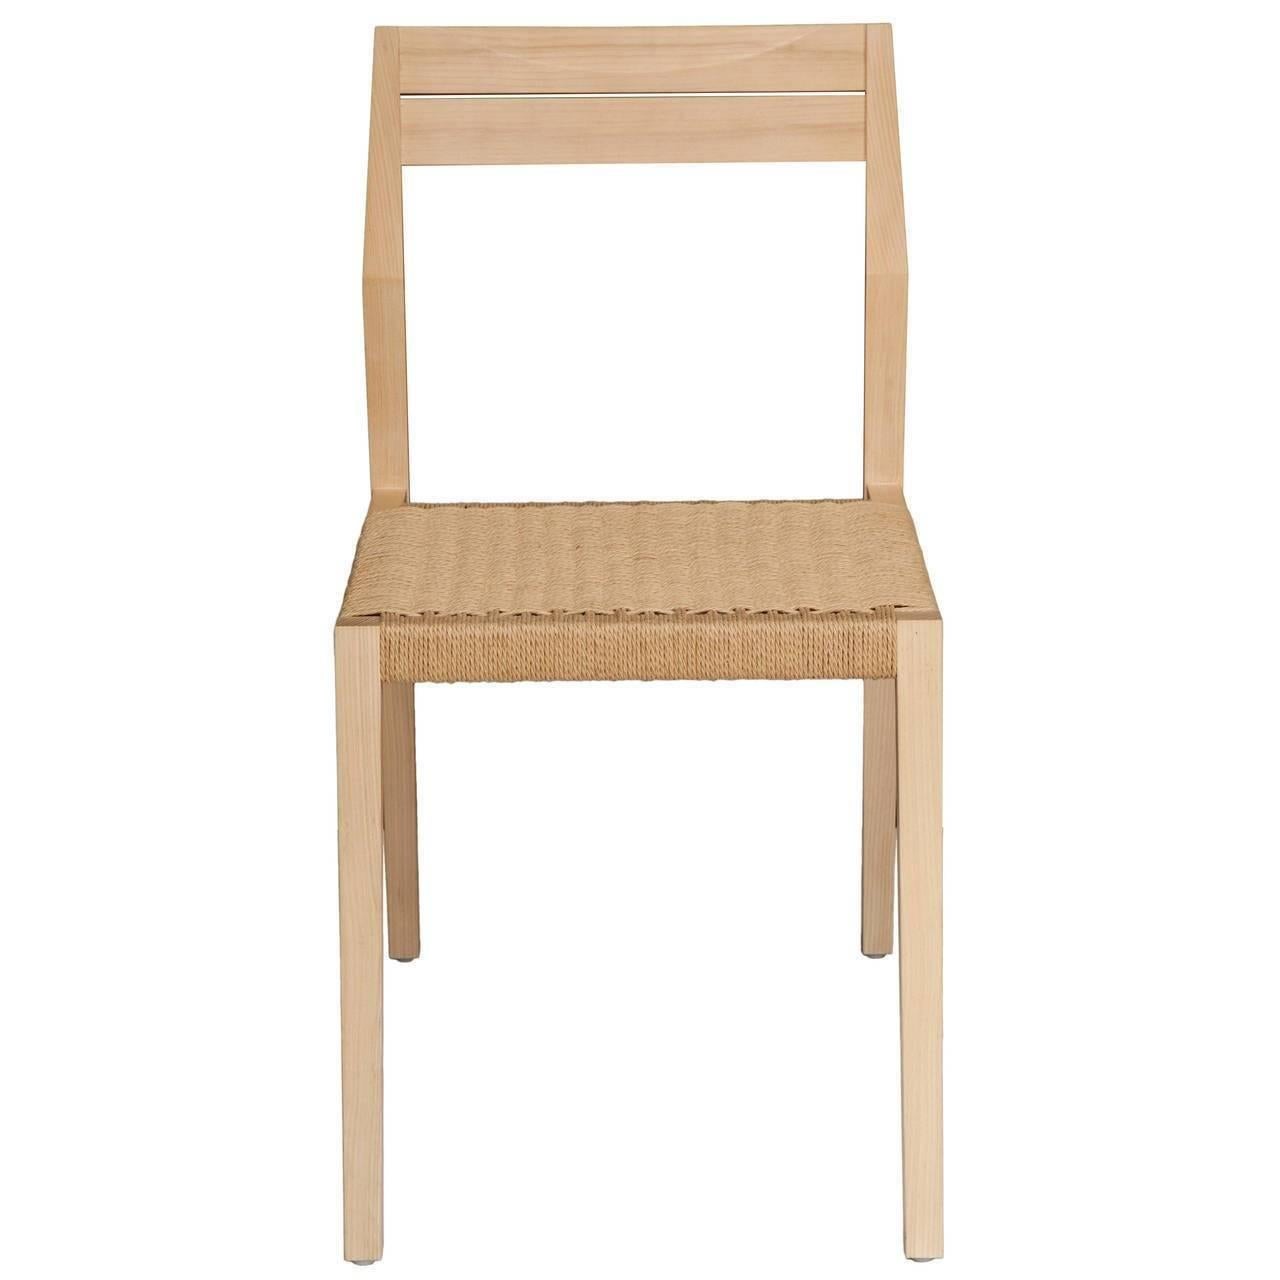 Set of ten oiled ash dining chair with paper cord seat. 
Designed by Paul Mignogna for Stillmade.

Measures: Seat height 18.5”.
Seat depth 18”.

Custom orders have a lead time of 10-12 weeks FOB NYC. Lead time contingent upon selection of